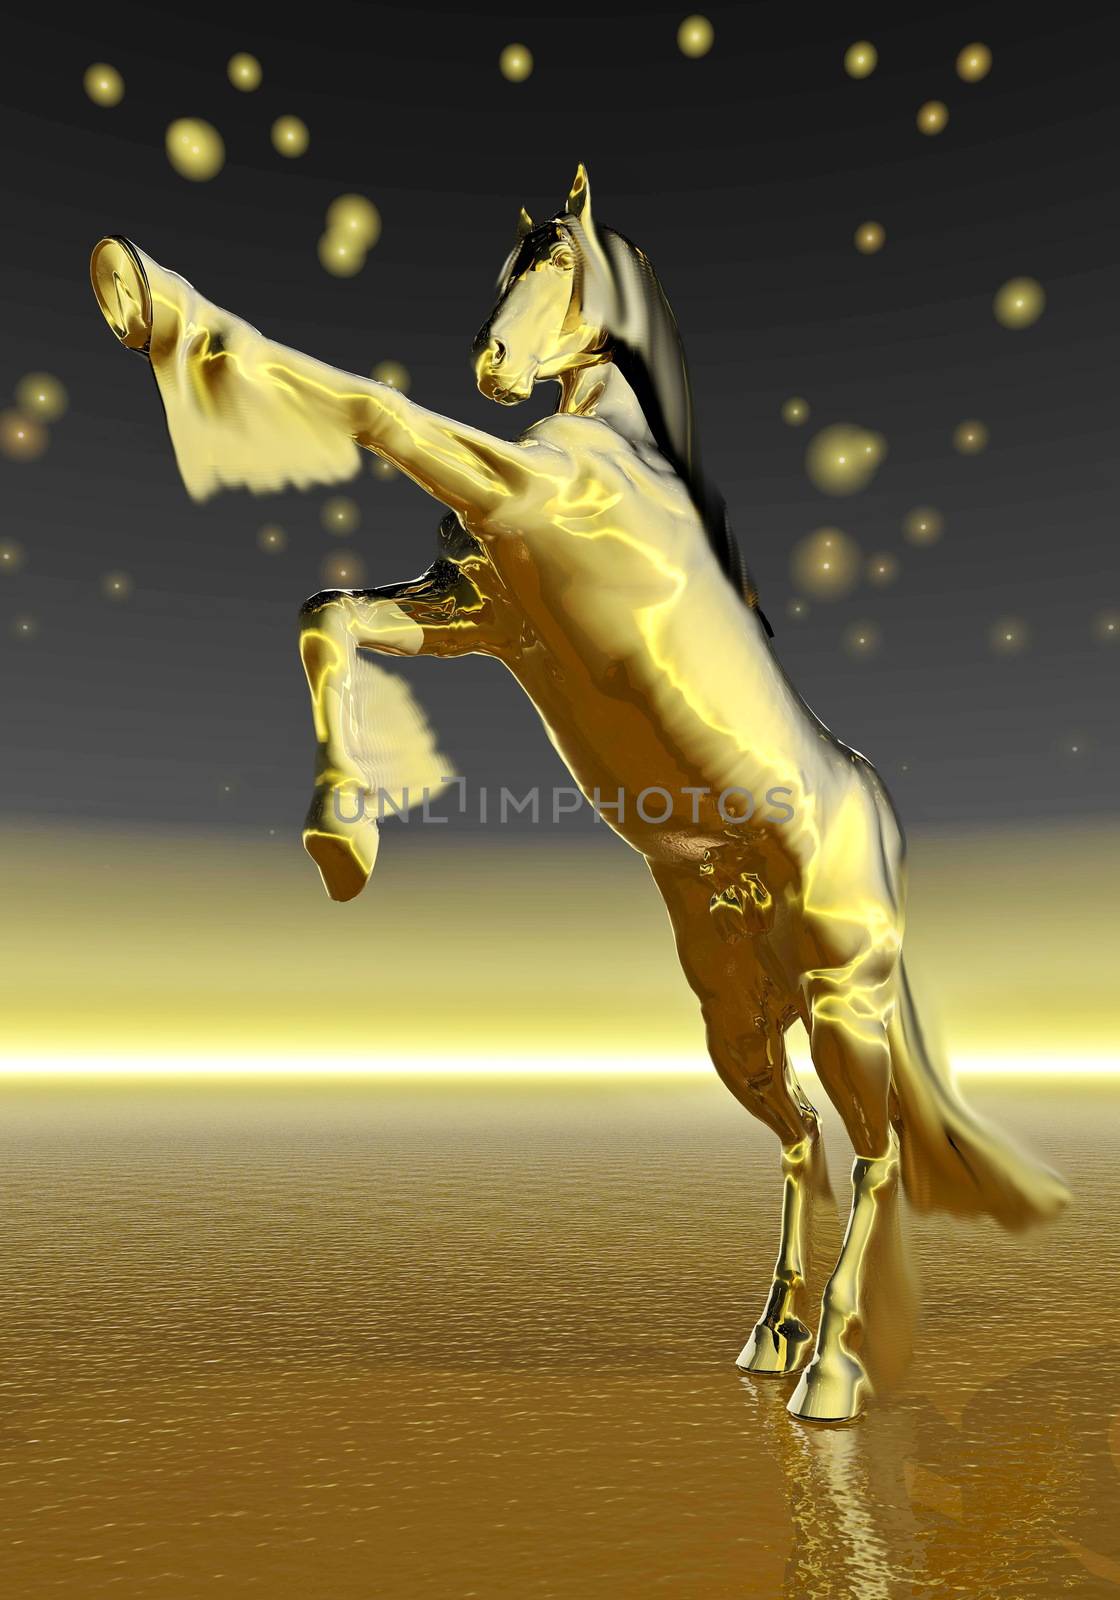 Golden rearing horse by beautiful starry night